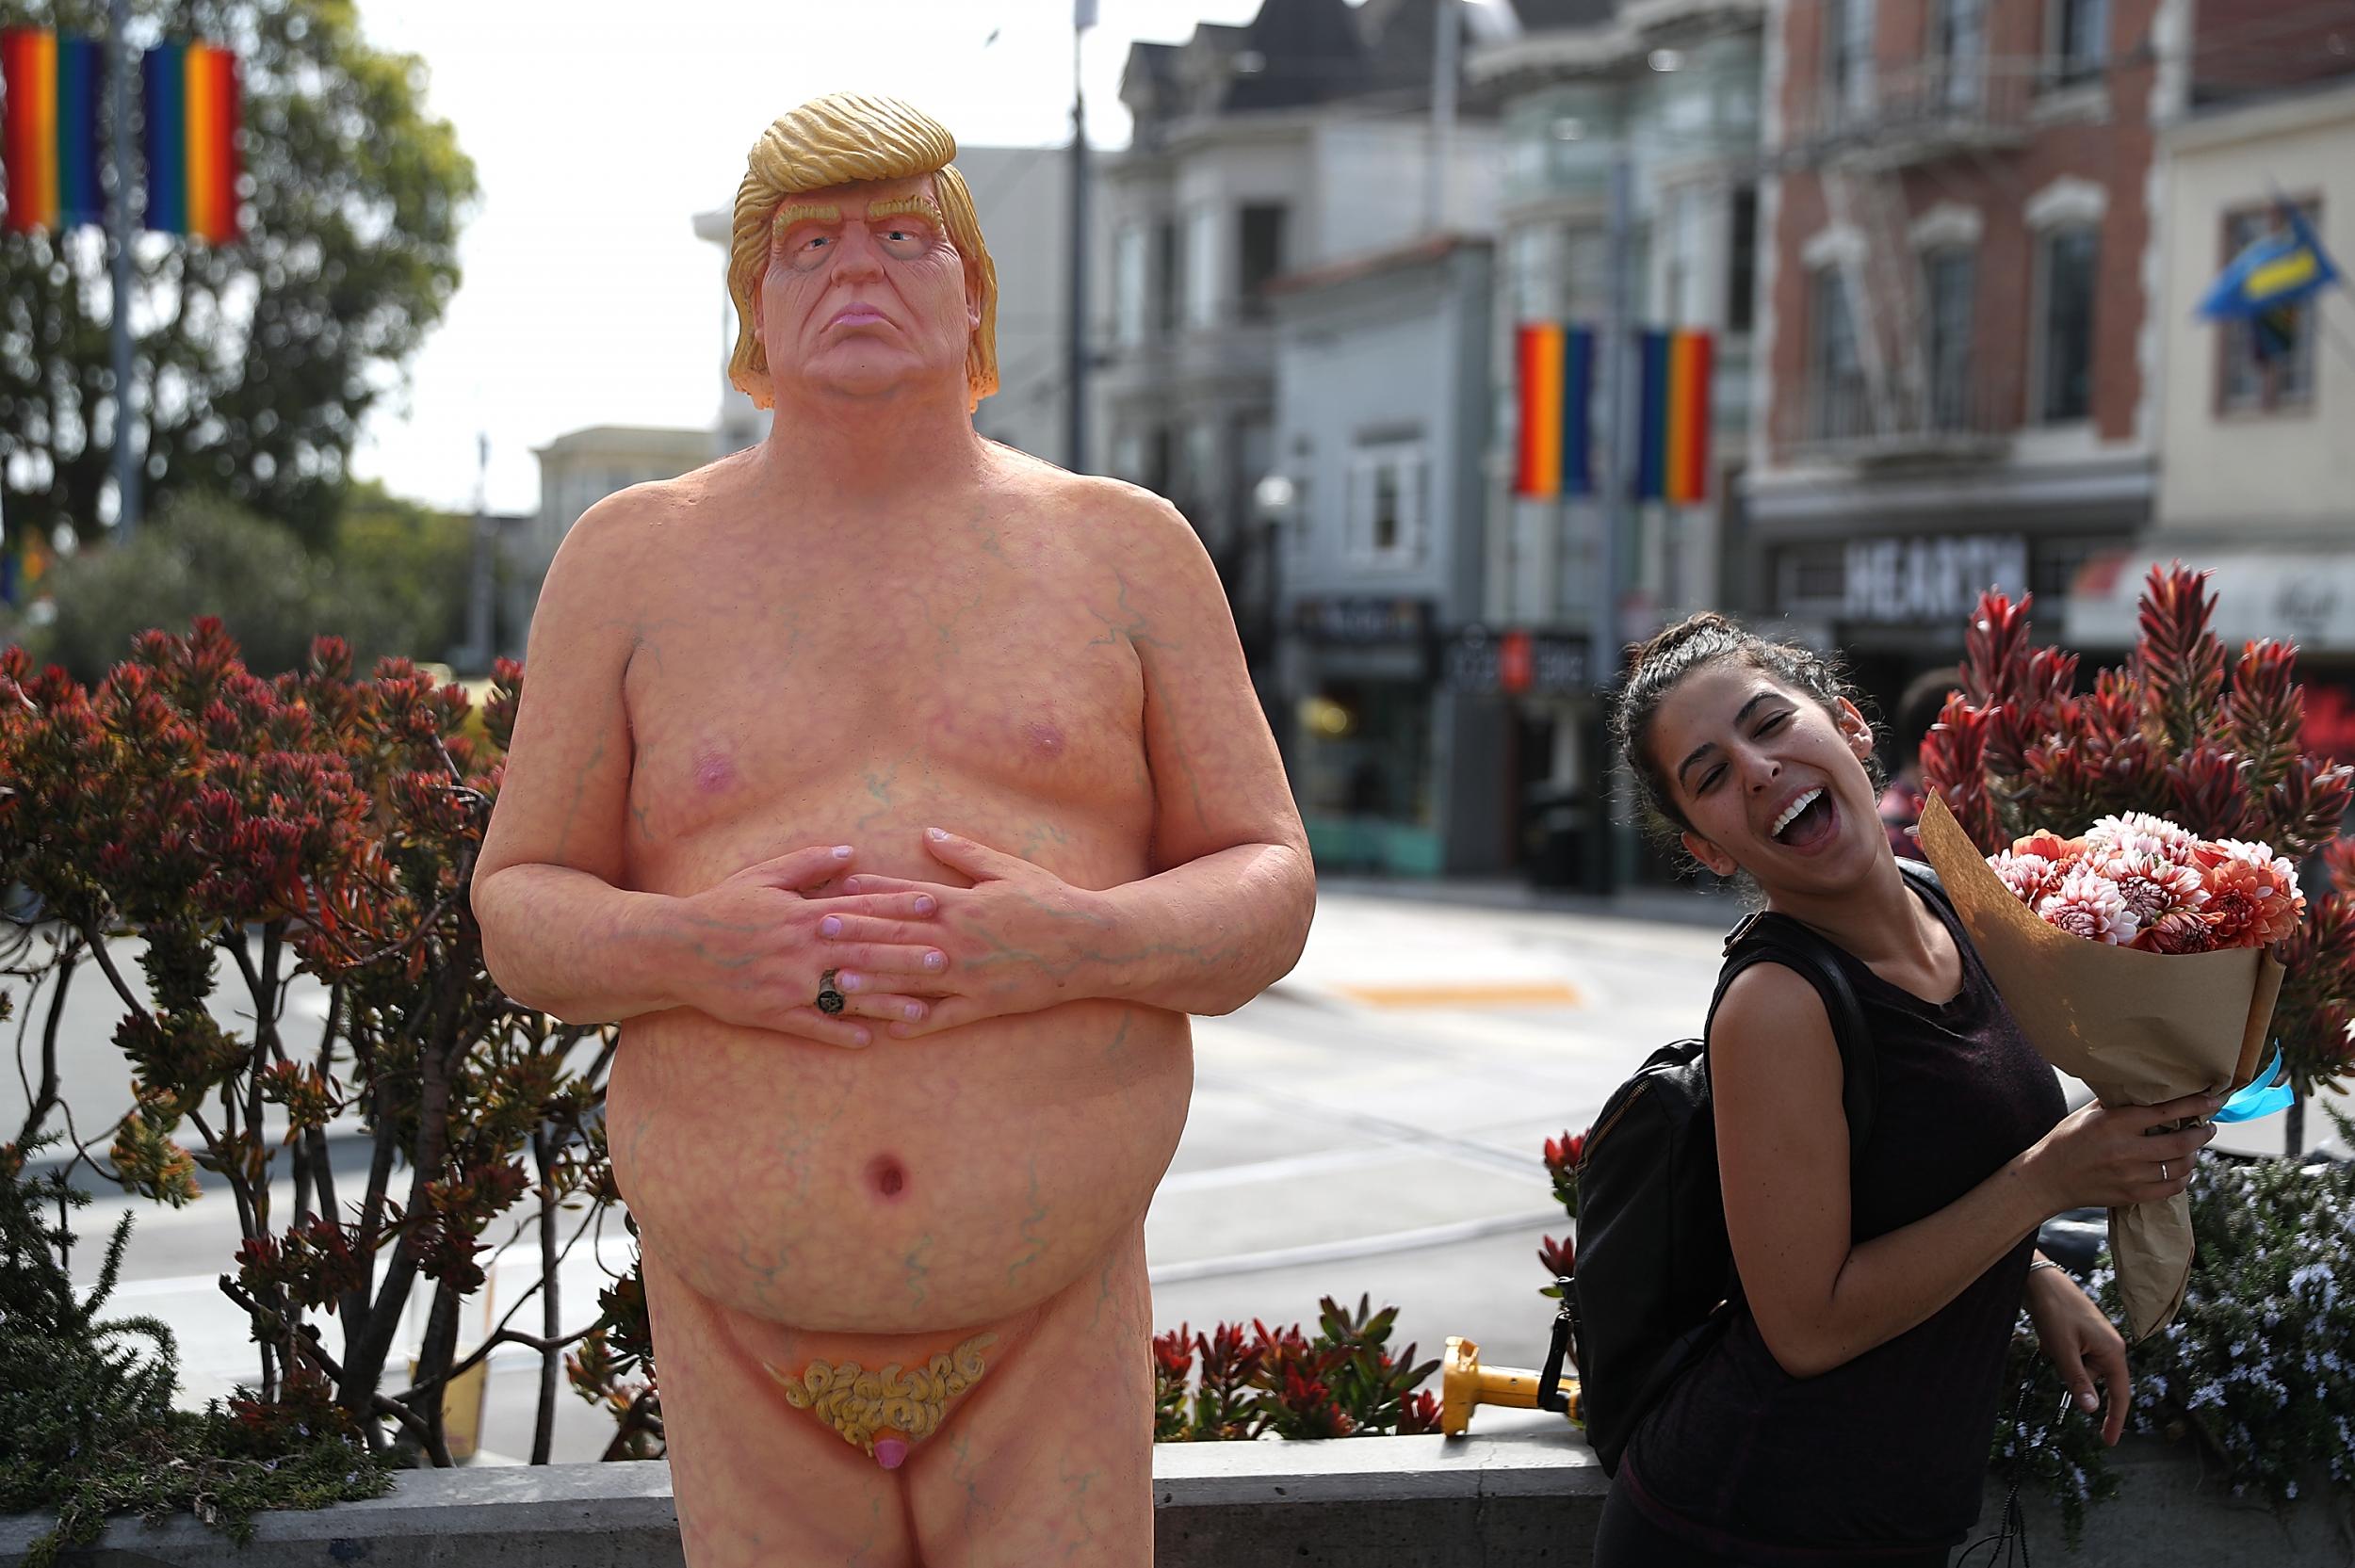 Naked Donald Trump statue expected to